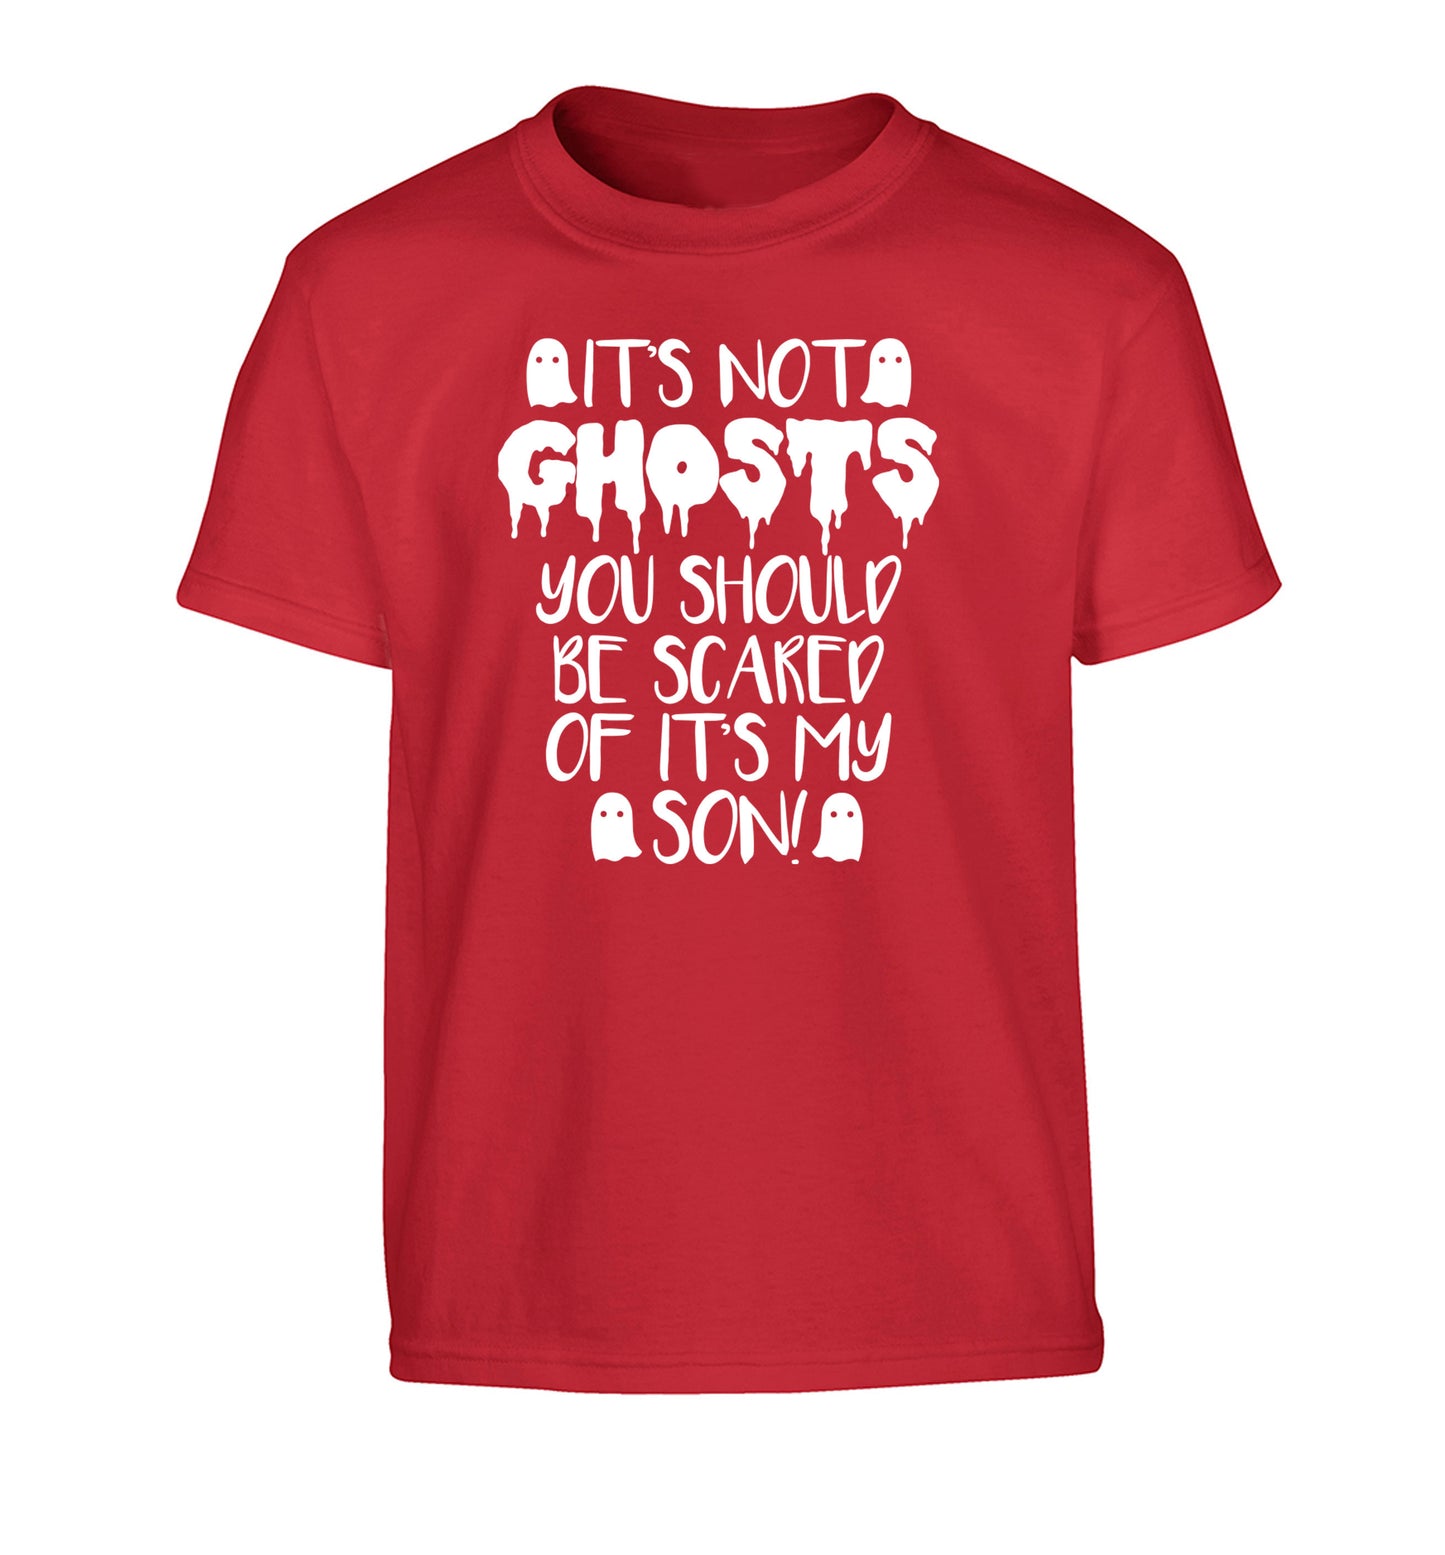 It's not ghosts you should be scared of it's my son! Children's red Tshirt 12-14 Years